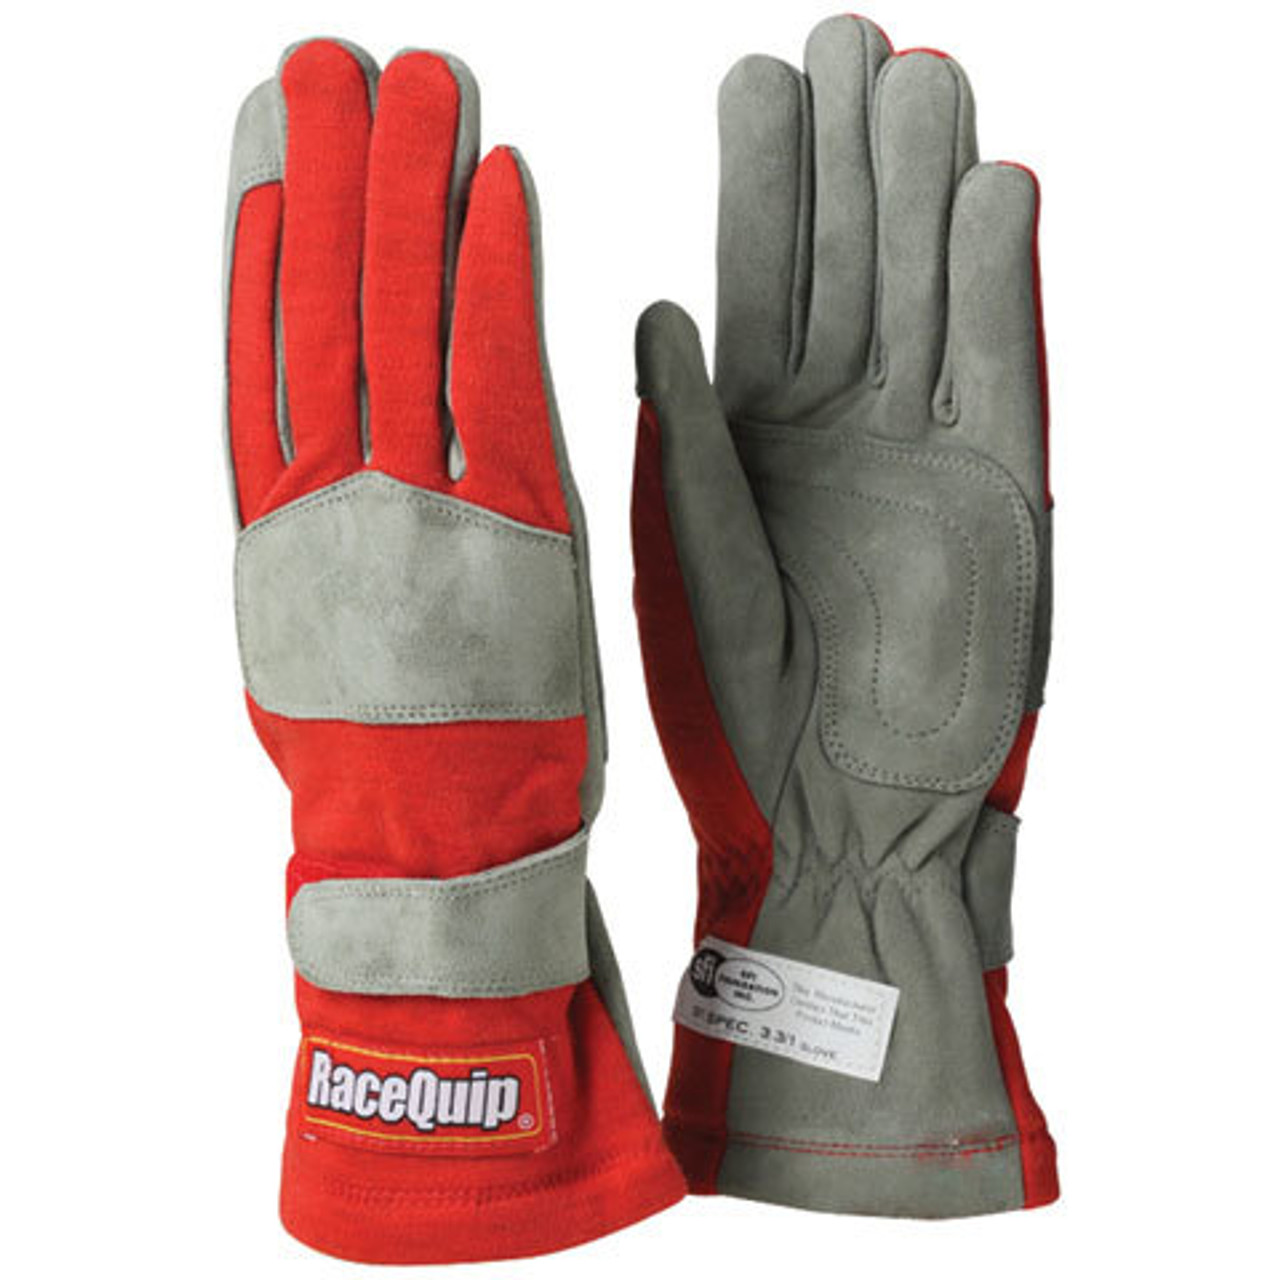 RaceQuip Gloves Single Layer Small Red SFI